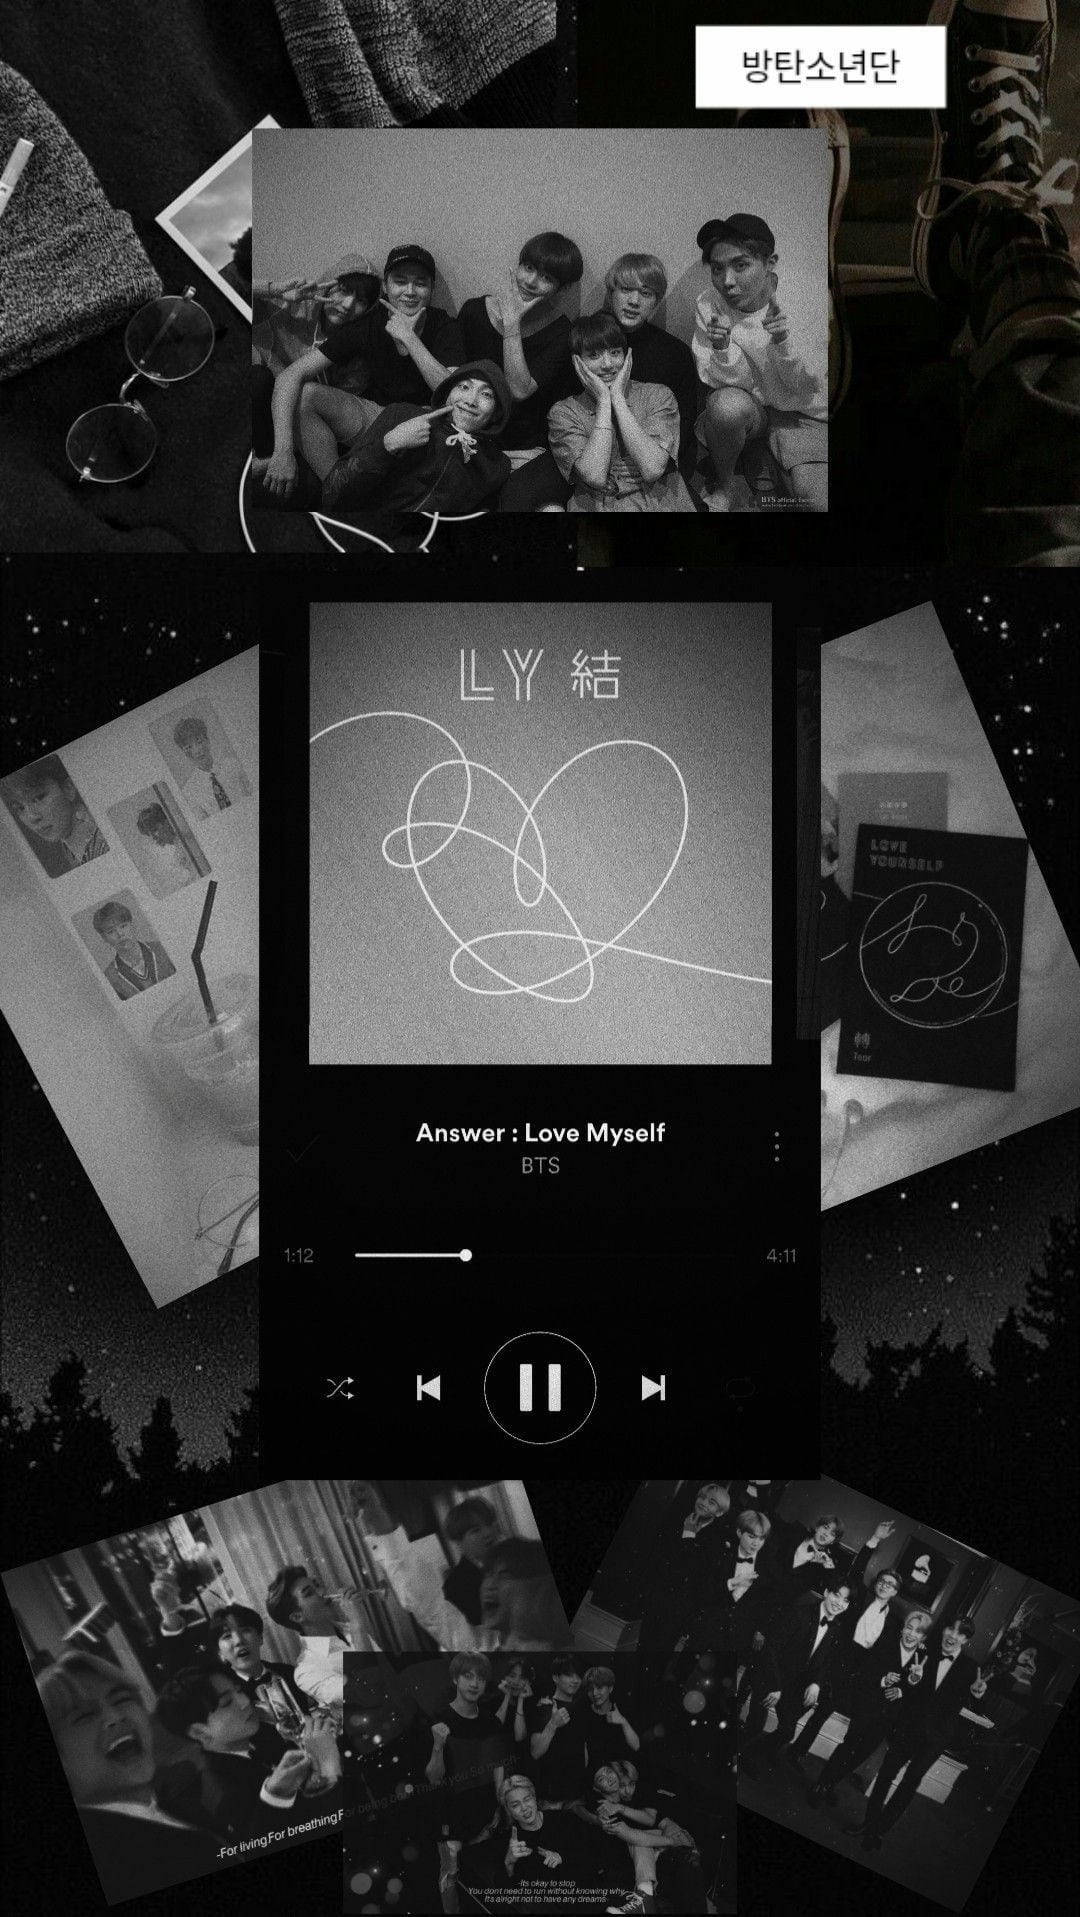 Download Music Player Collage Bts Black Aesthetic Wallpaper 